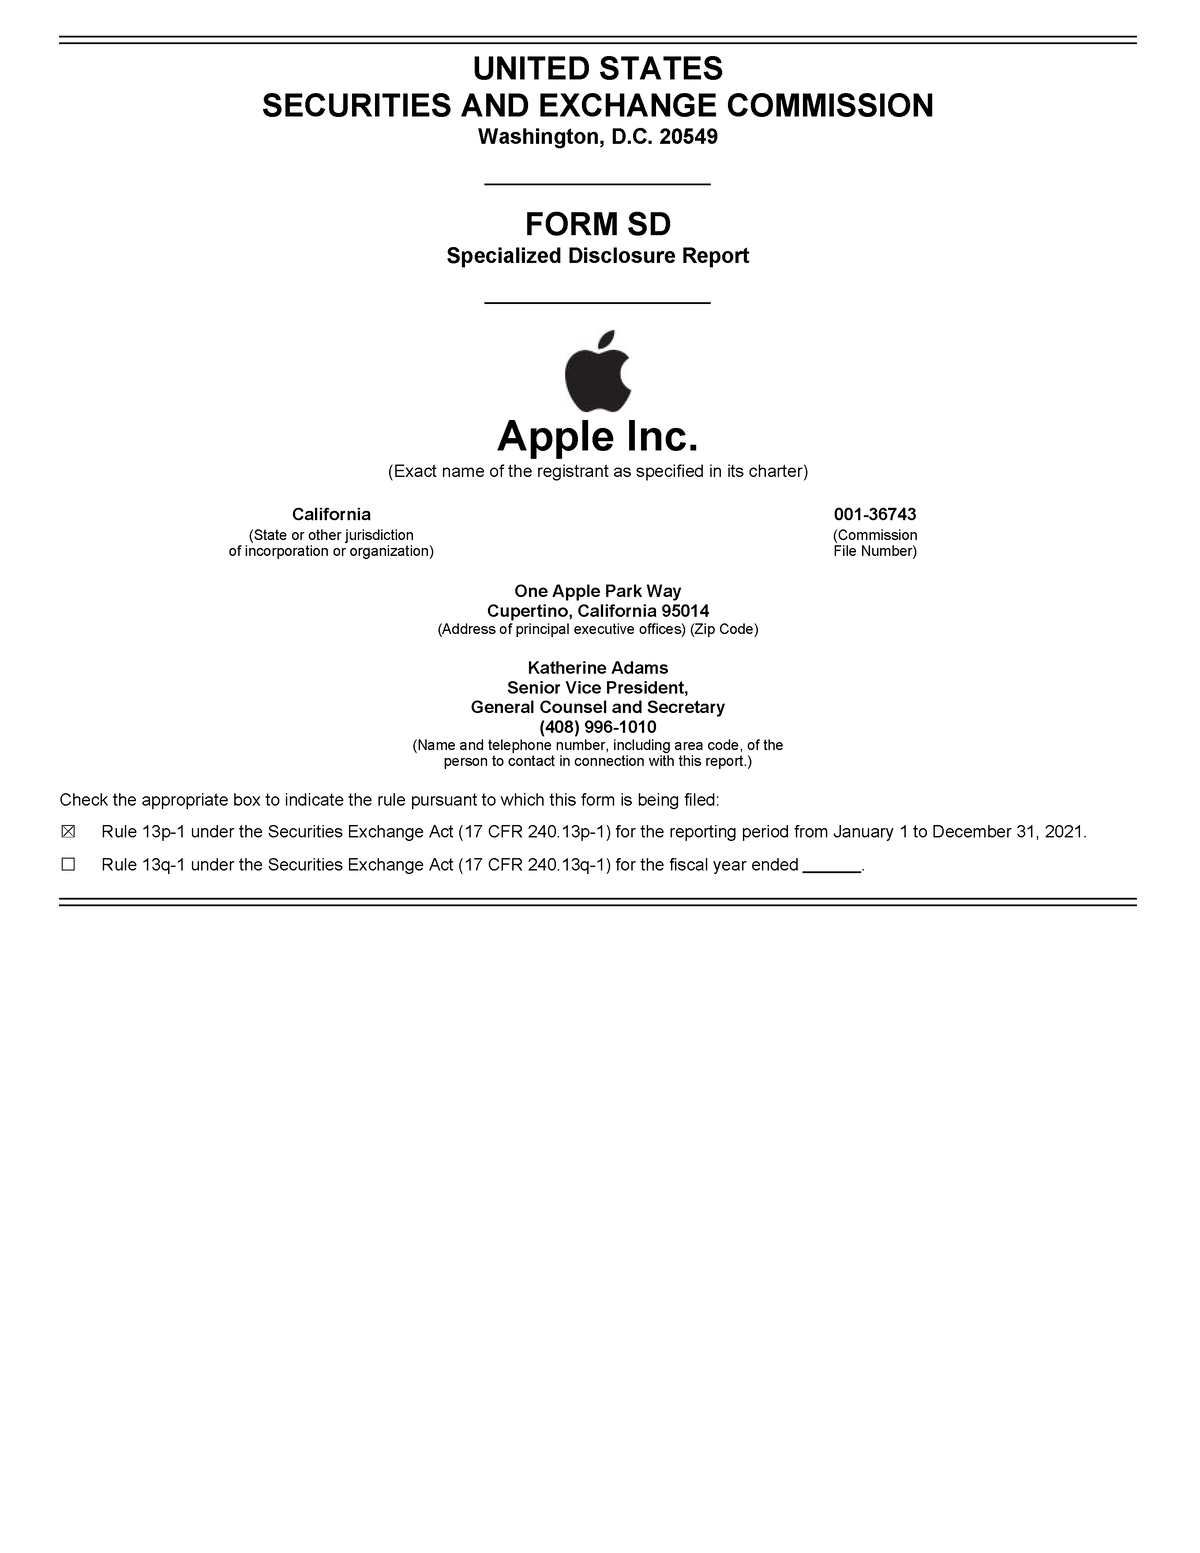 Apple Conflict Minerals Report UNITED STATES SECURITIES AND EXCHANGE